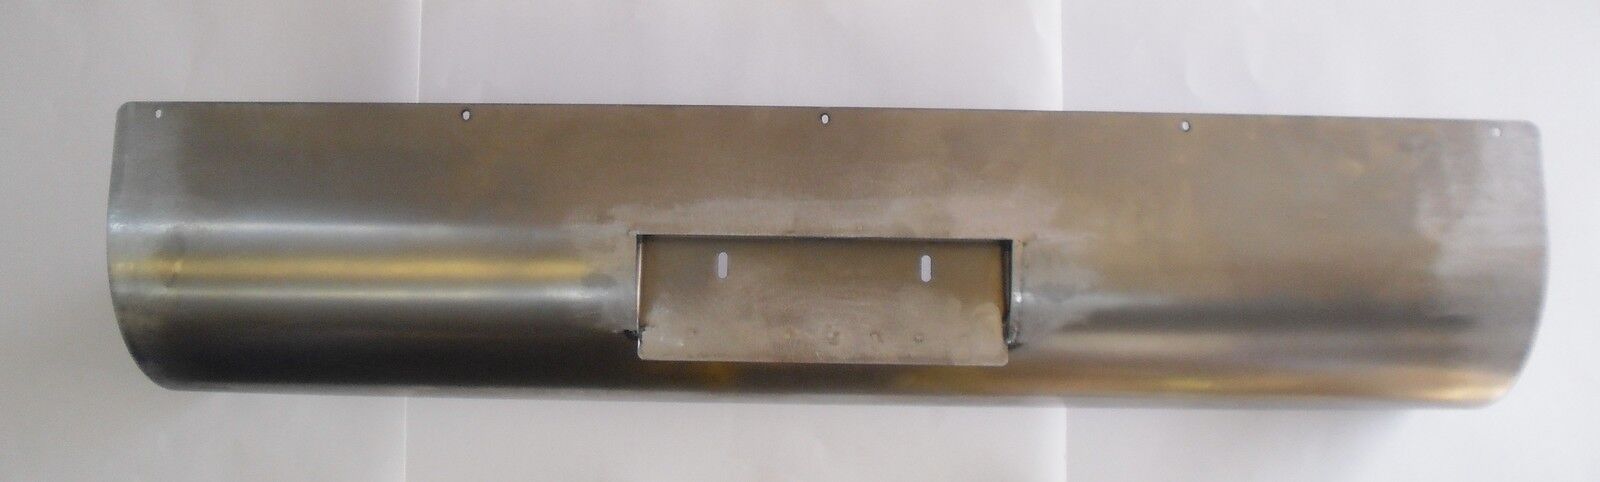 1953-1972 Ford F-100 Truck Flareside Bed STEEL Roll Pan with License Box Center